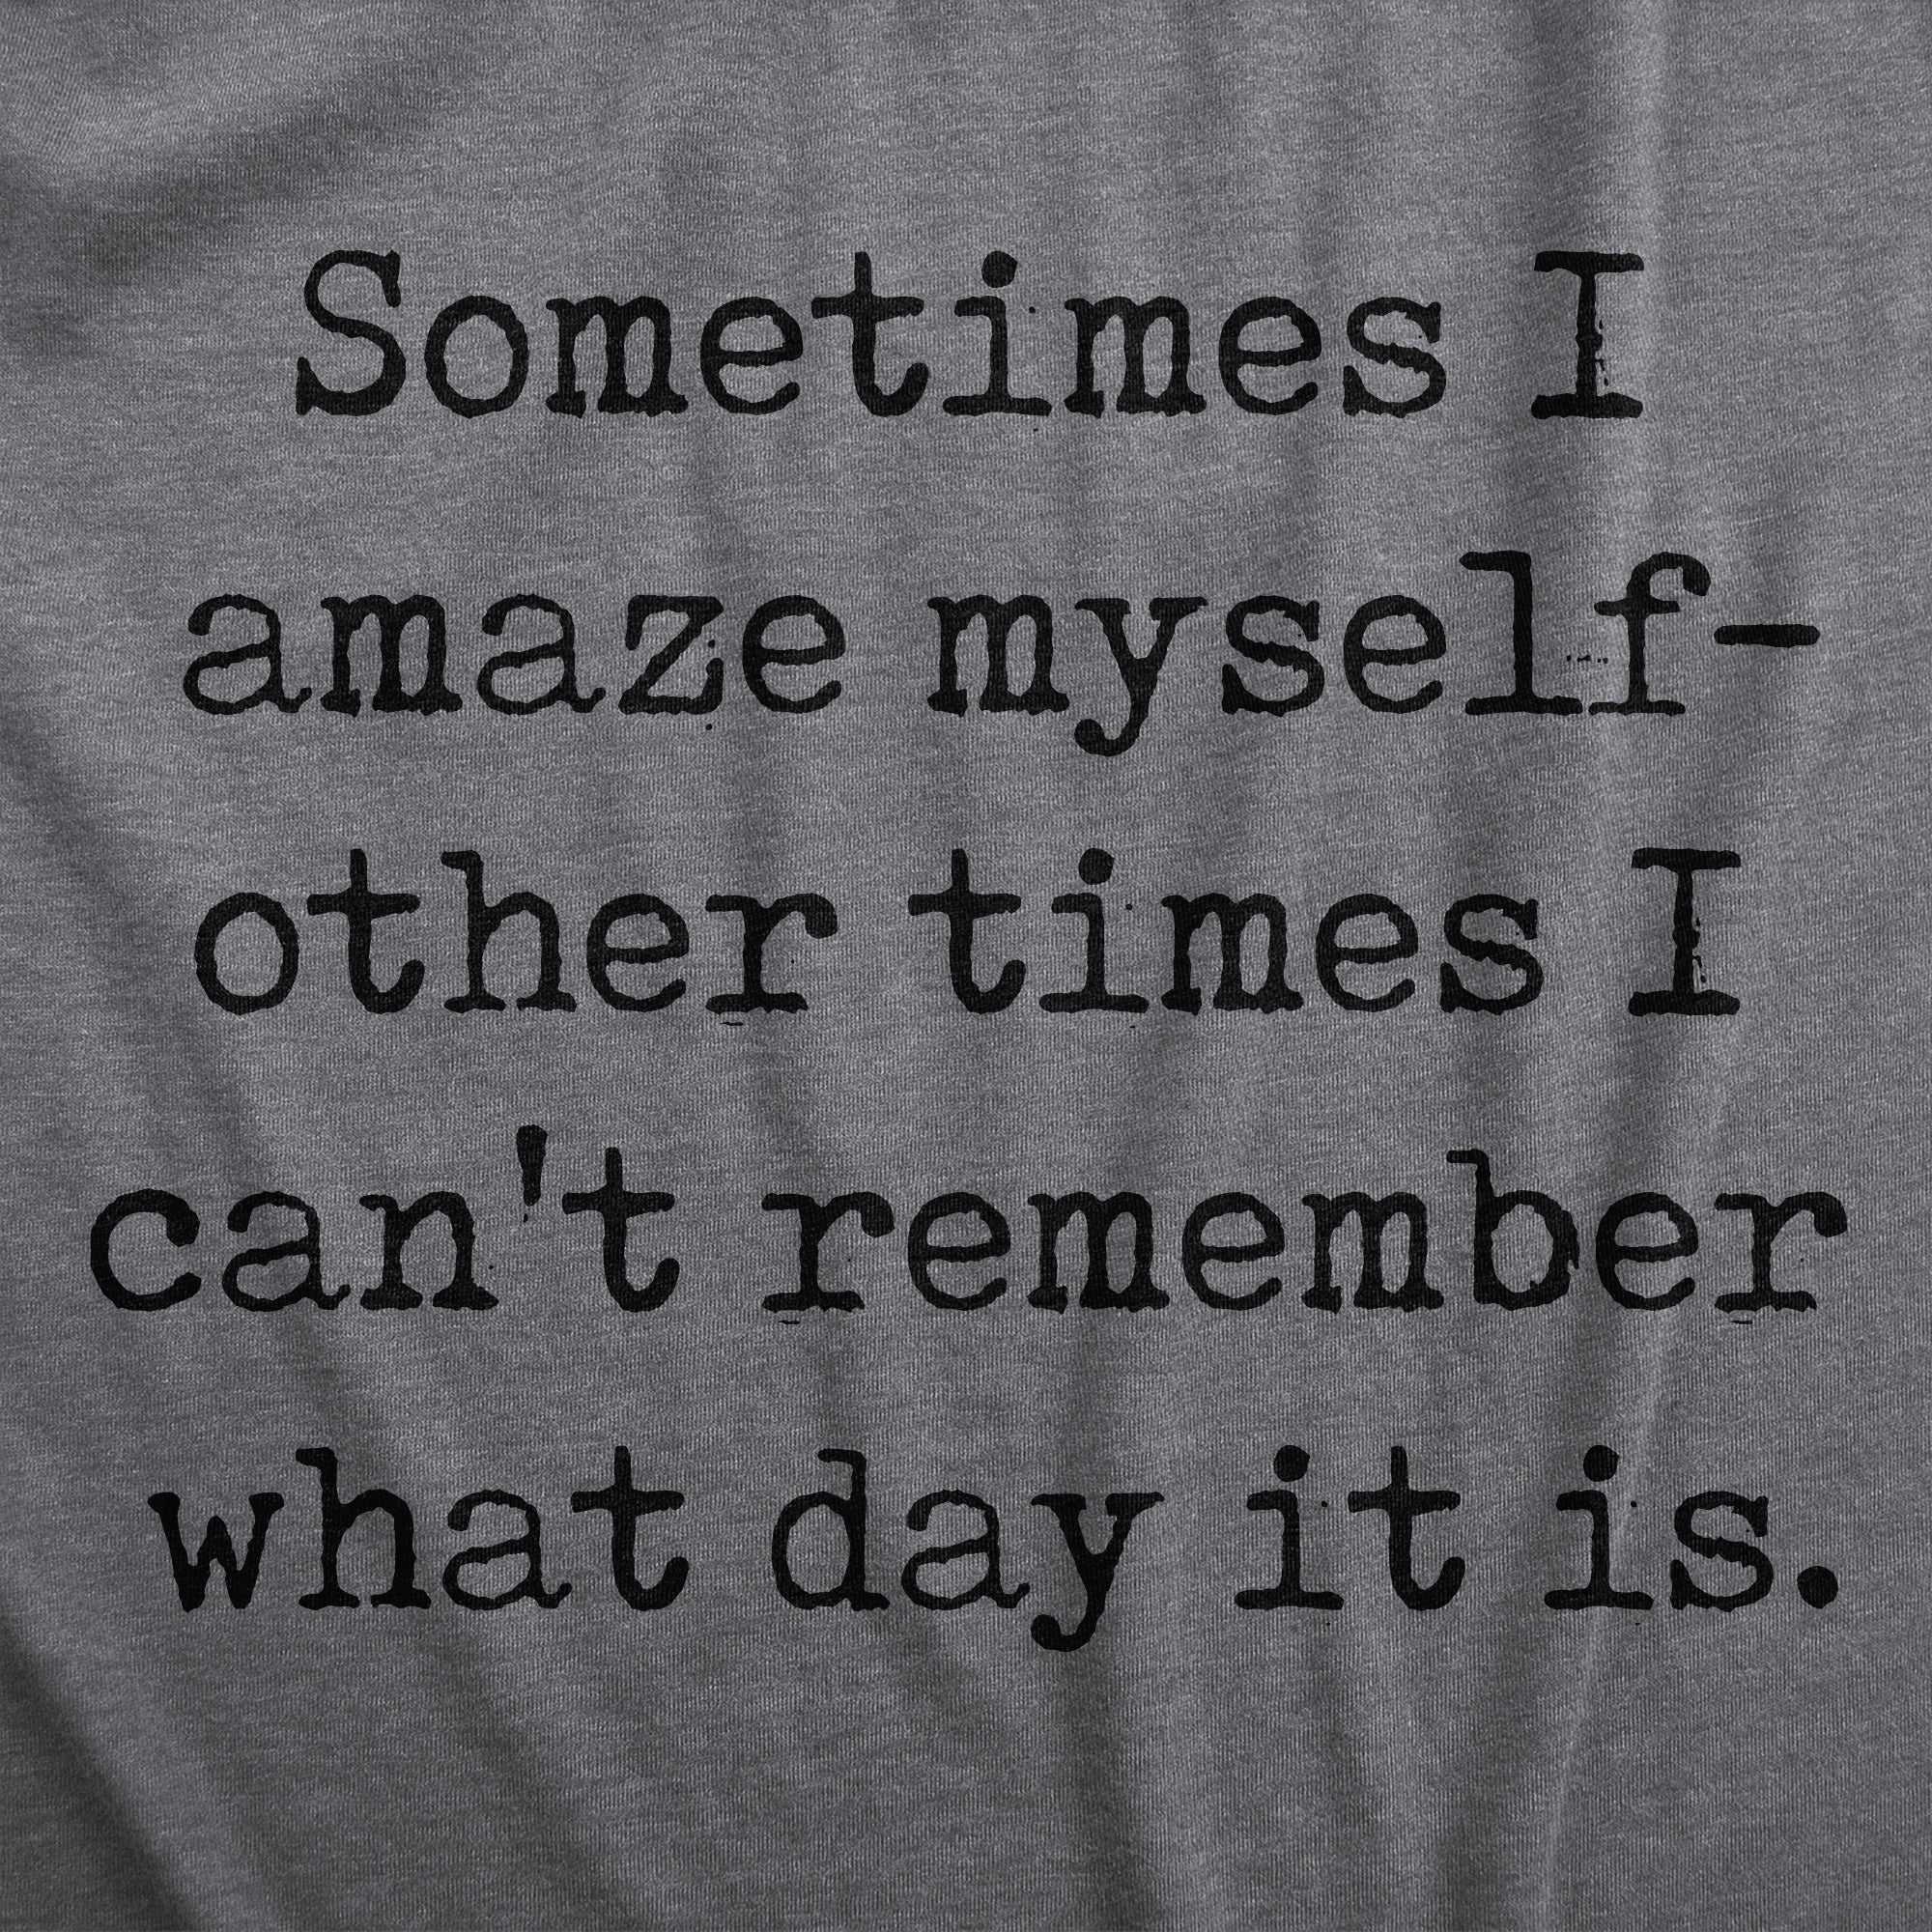 Funny Dark Heather Grey - AMAZE Sometimes I Amaze Myself Other Times I Cant Remember What Day It Is Mens T Shirt Nerdy Sarcastic Tee